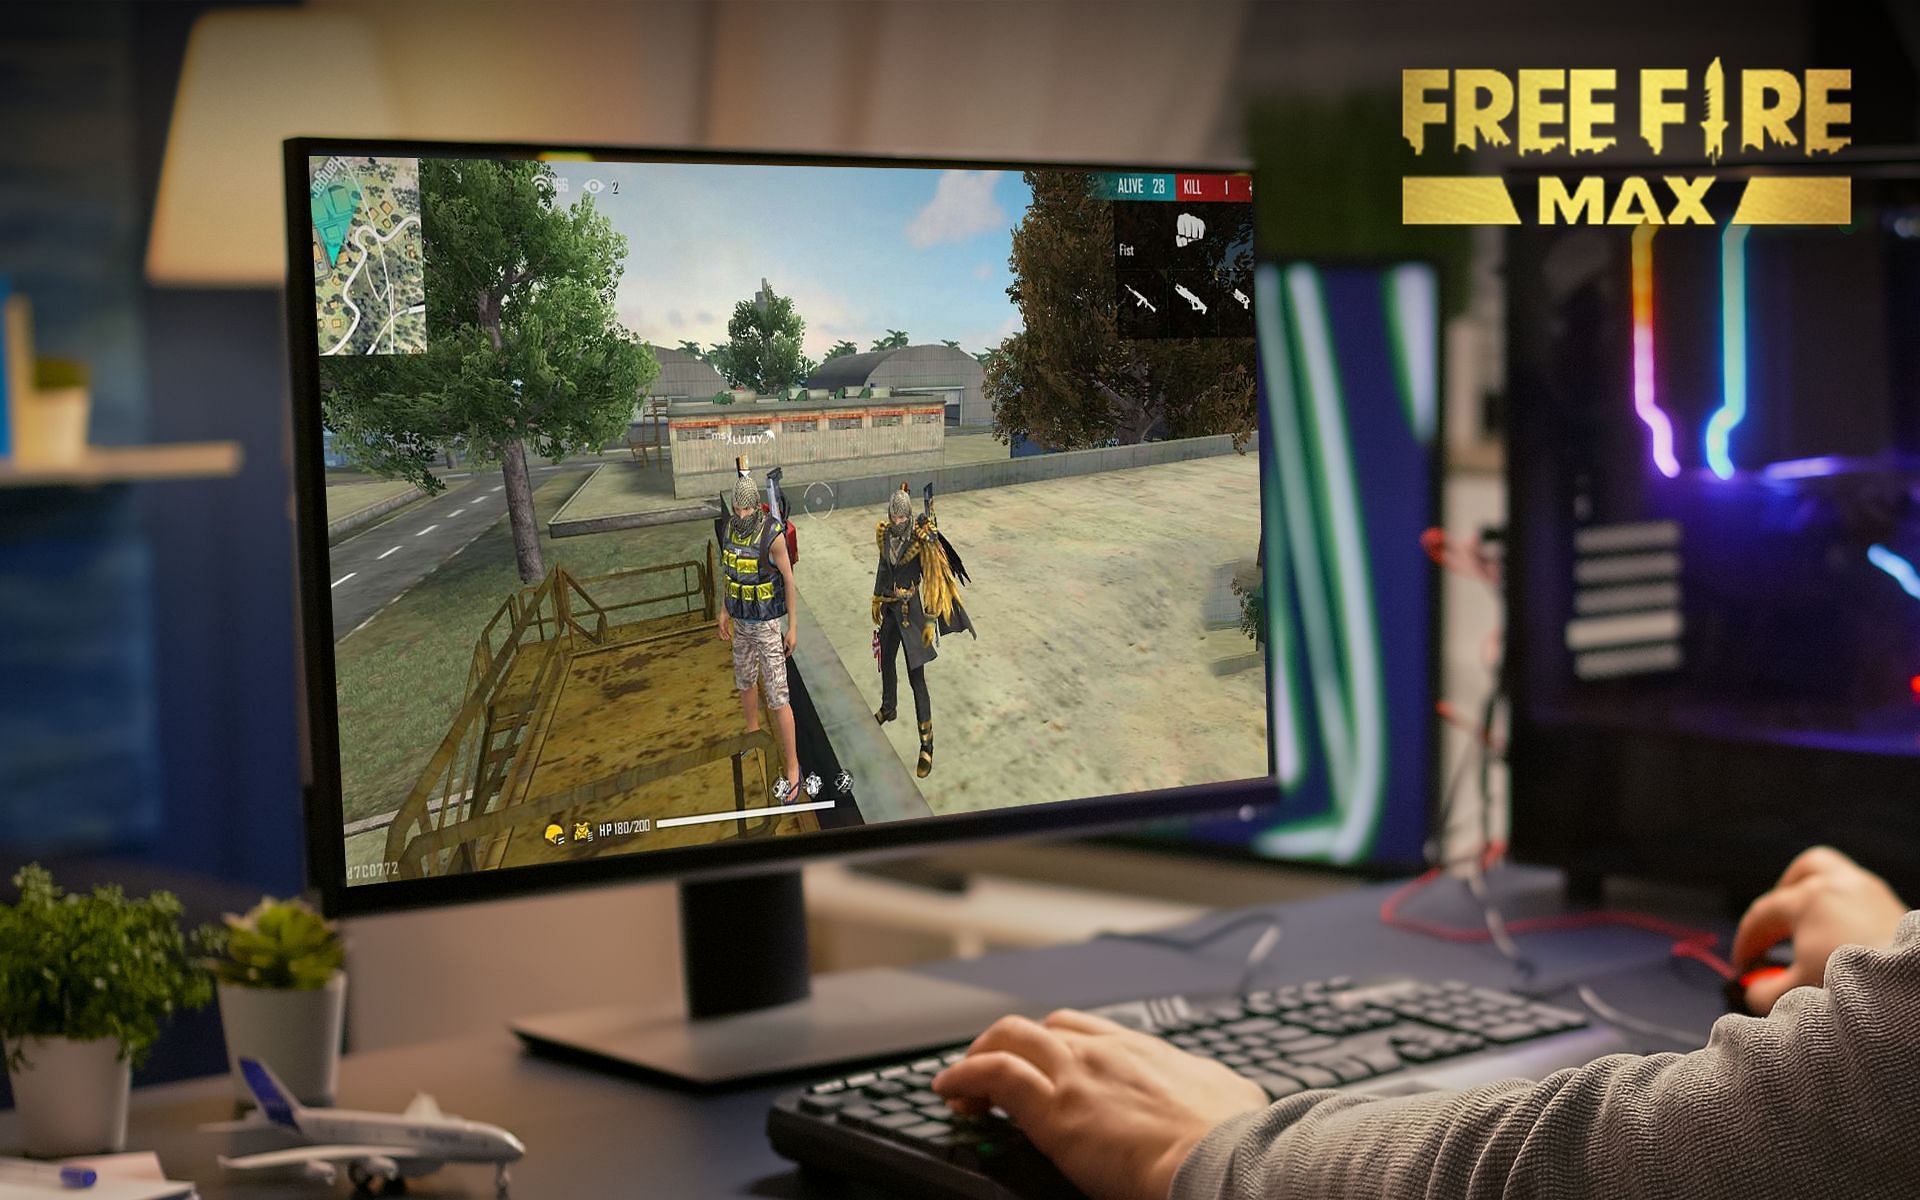 Play Free Fire Max on PC with Google Play Games